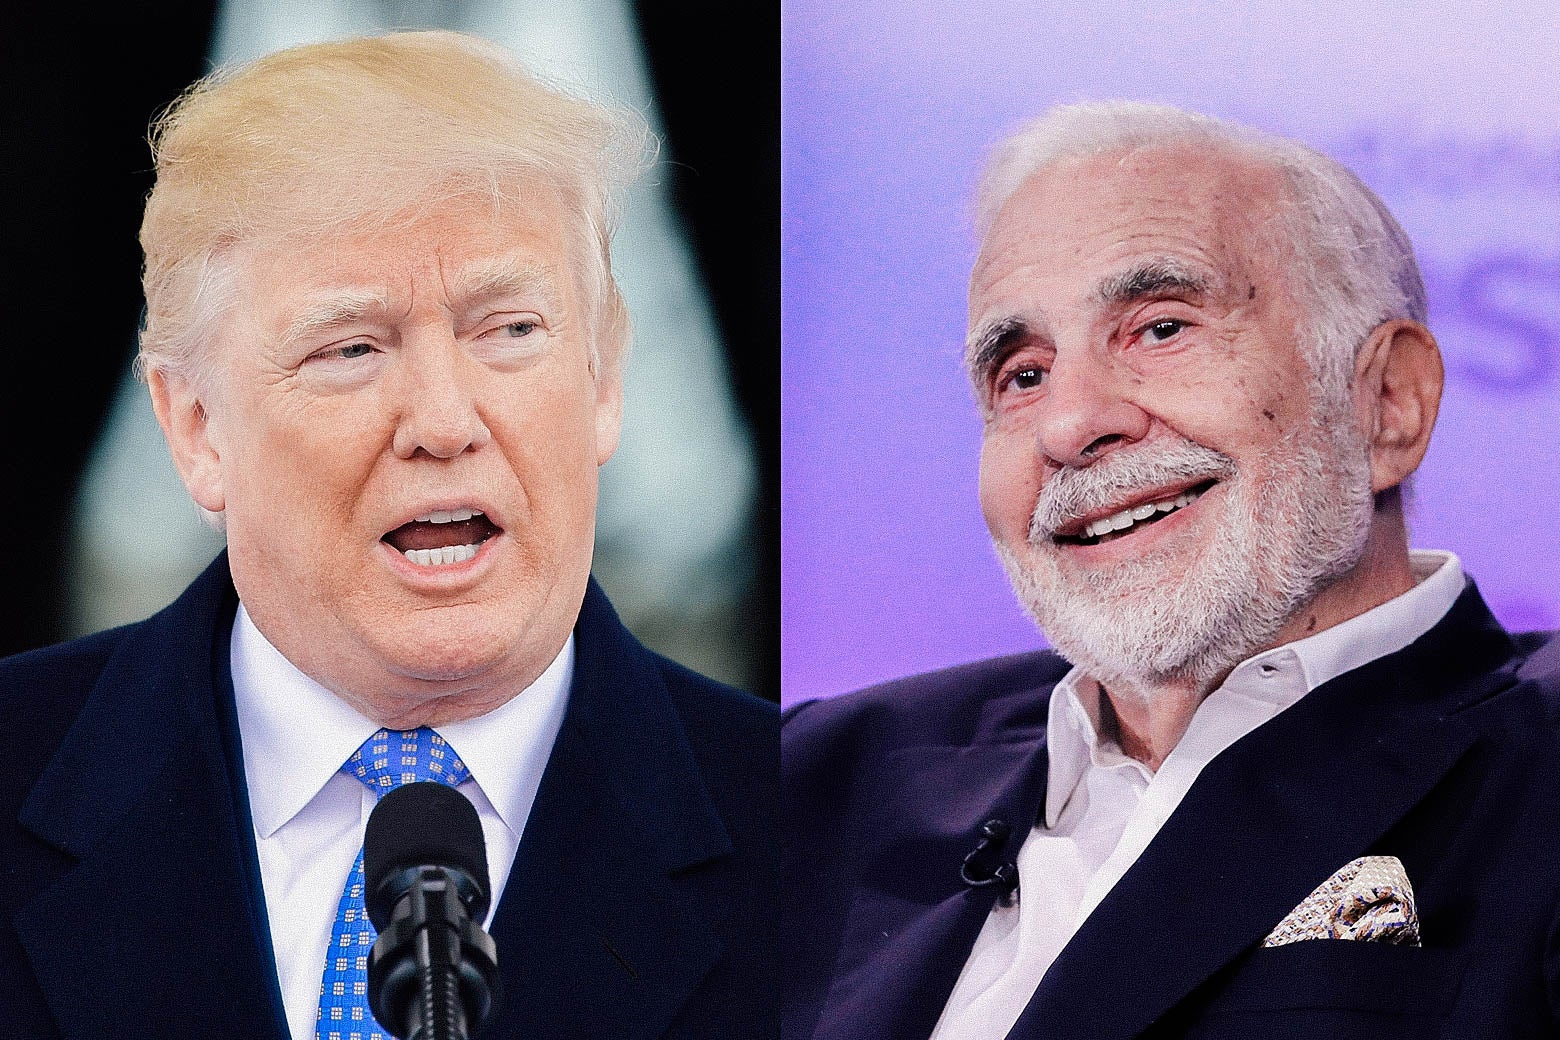 Side-by-side photos of Donald Trump and Carl Icahn.